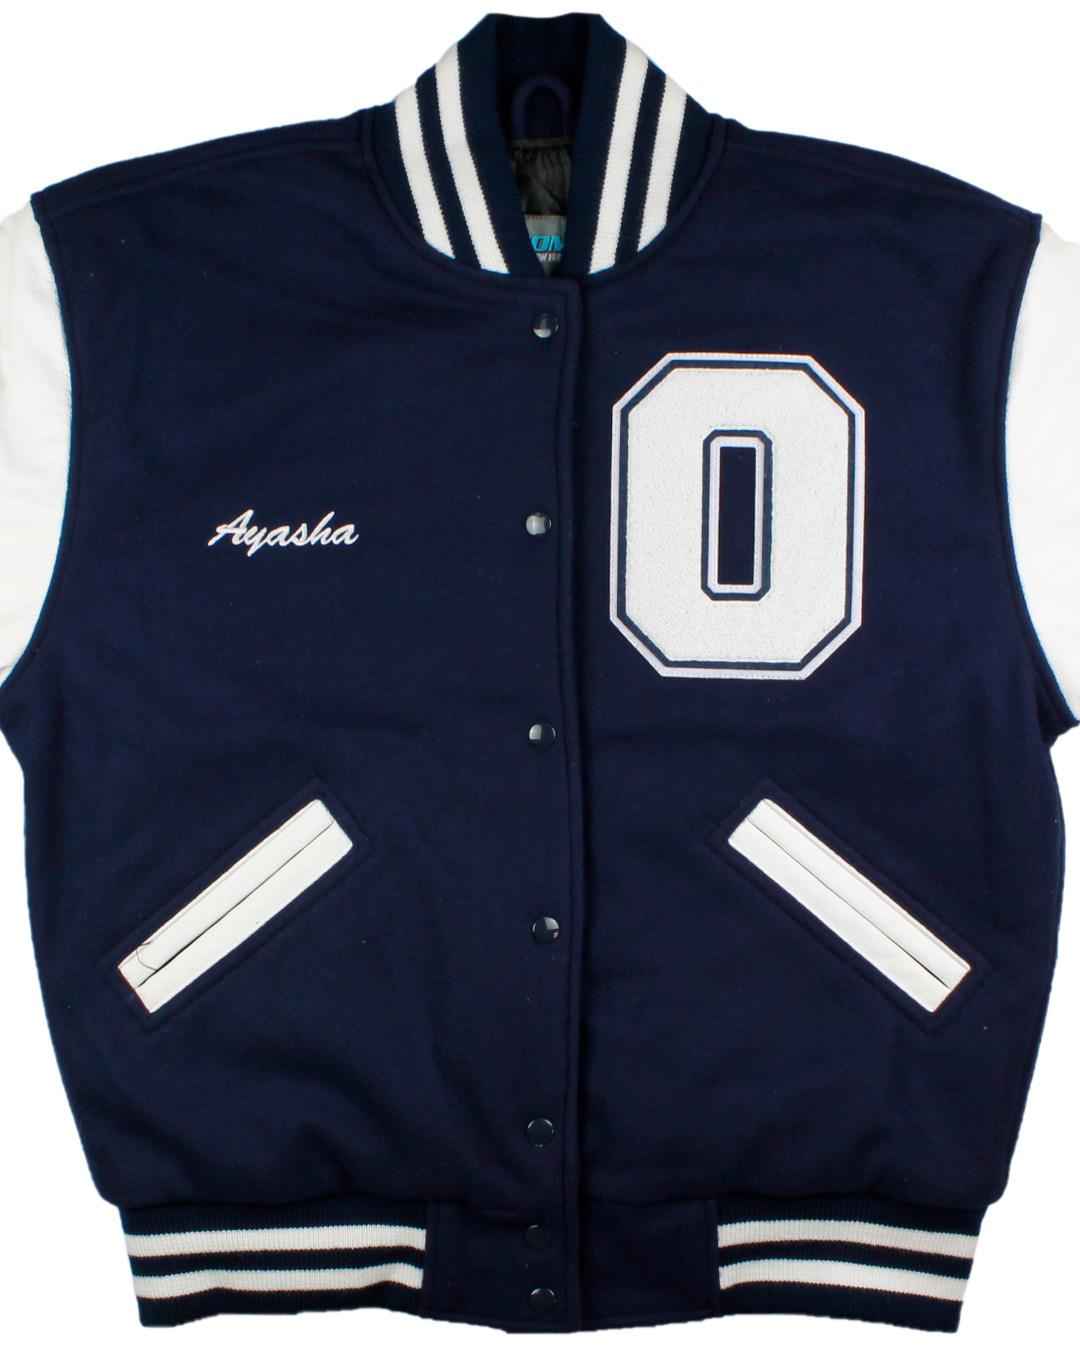 Olympia High School Letterman, Olympia, WA - Front